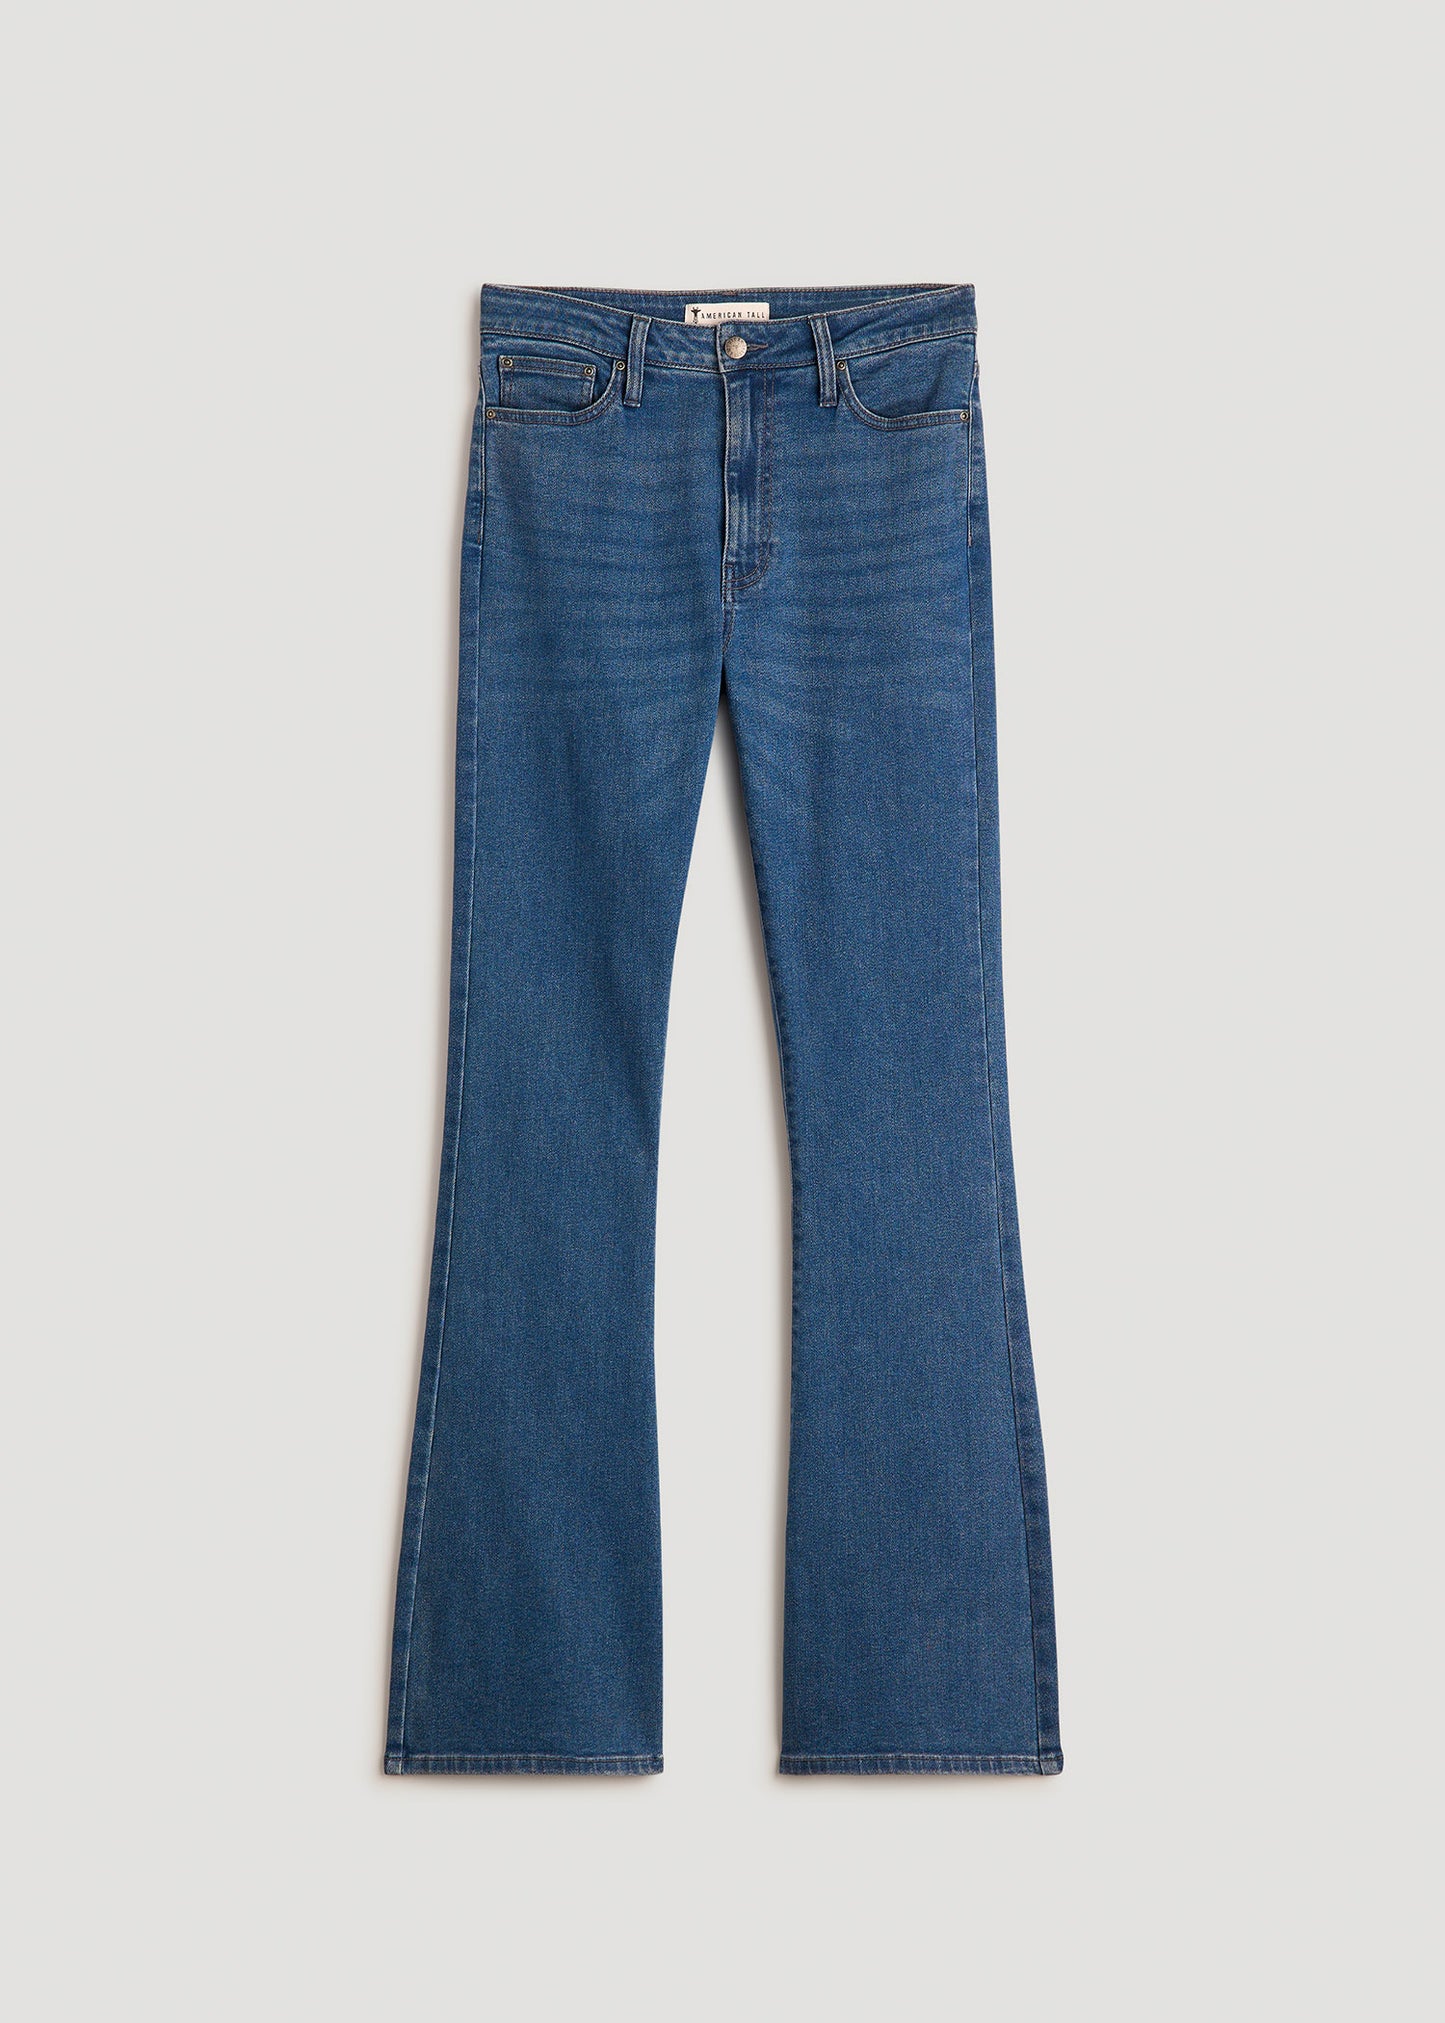 Chloe High Rise Flare Jeans for Tall Women in Washed Medium Indigo